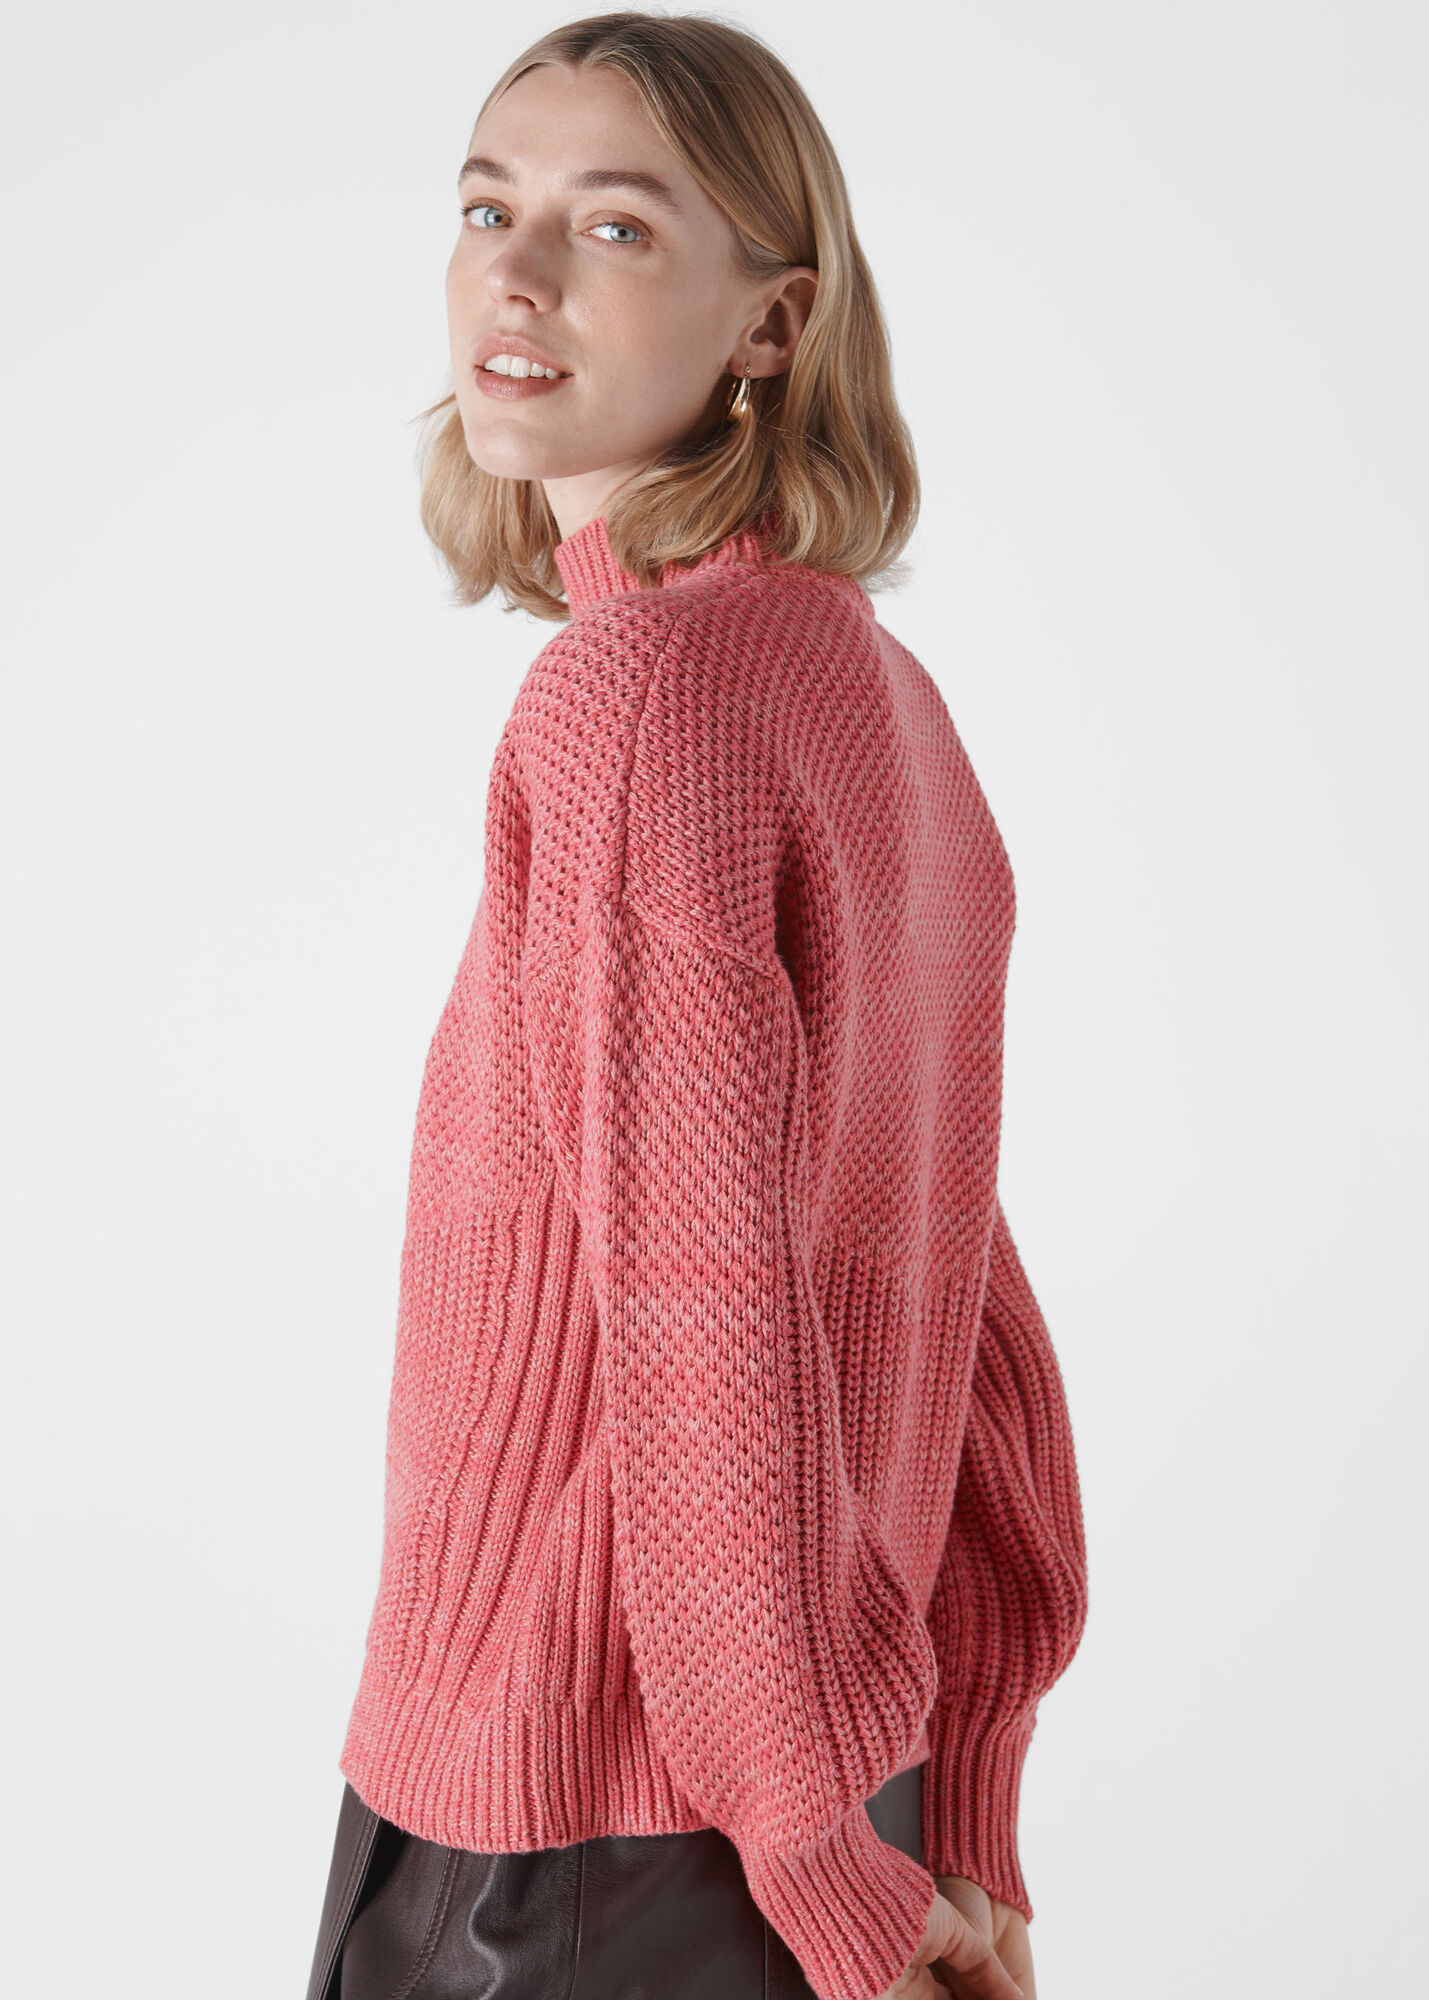 Pink Moss Stitch Textured Knit | WHISTLES | Whistles UK